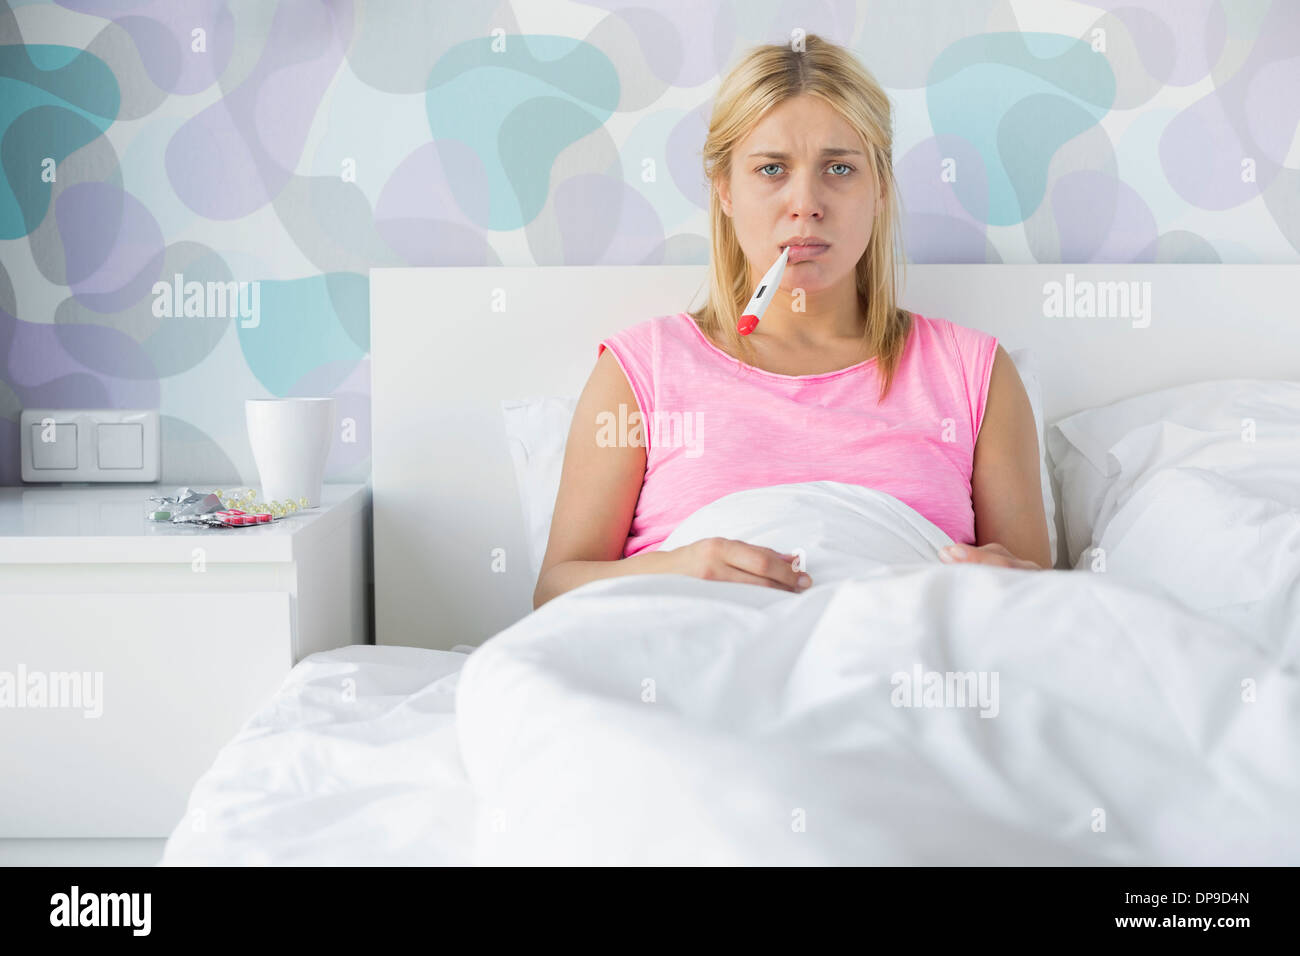 Portrait of young woman taking temperature with thermometer Stock Photo